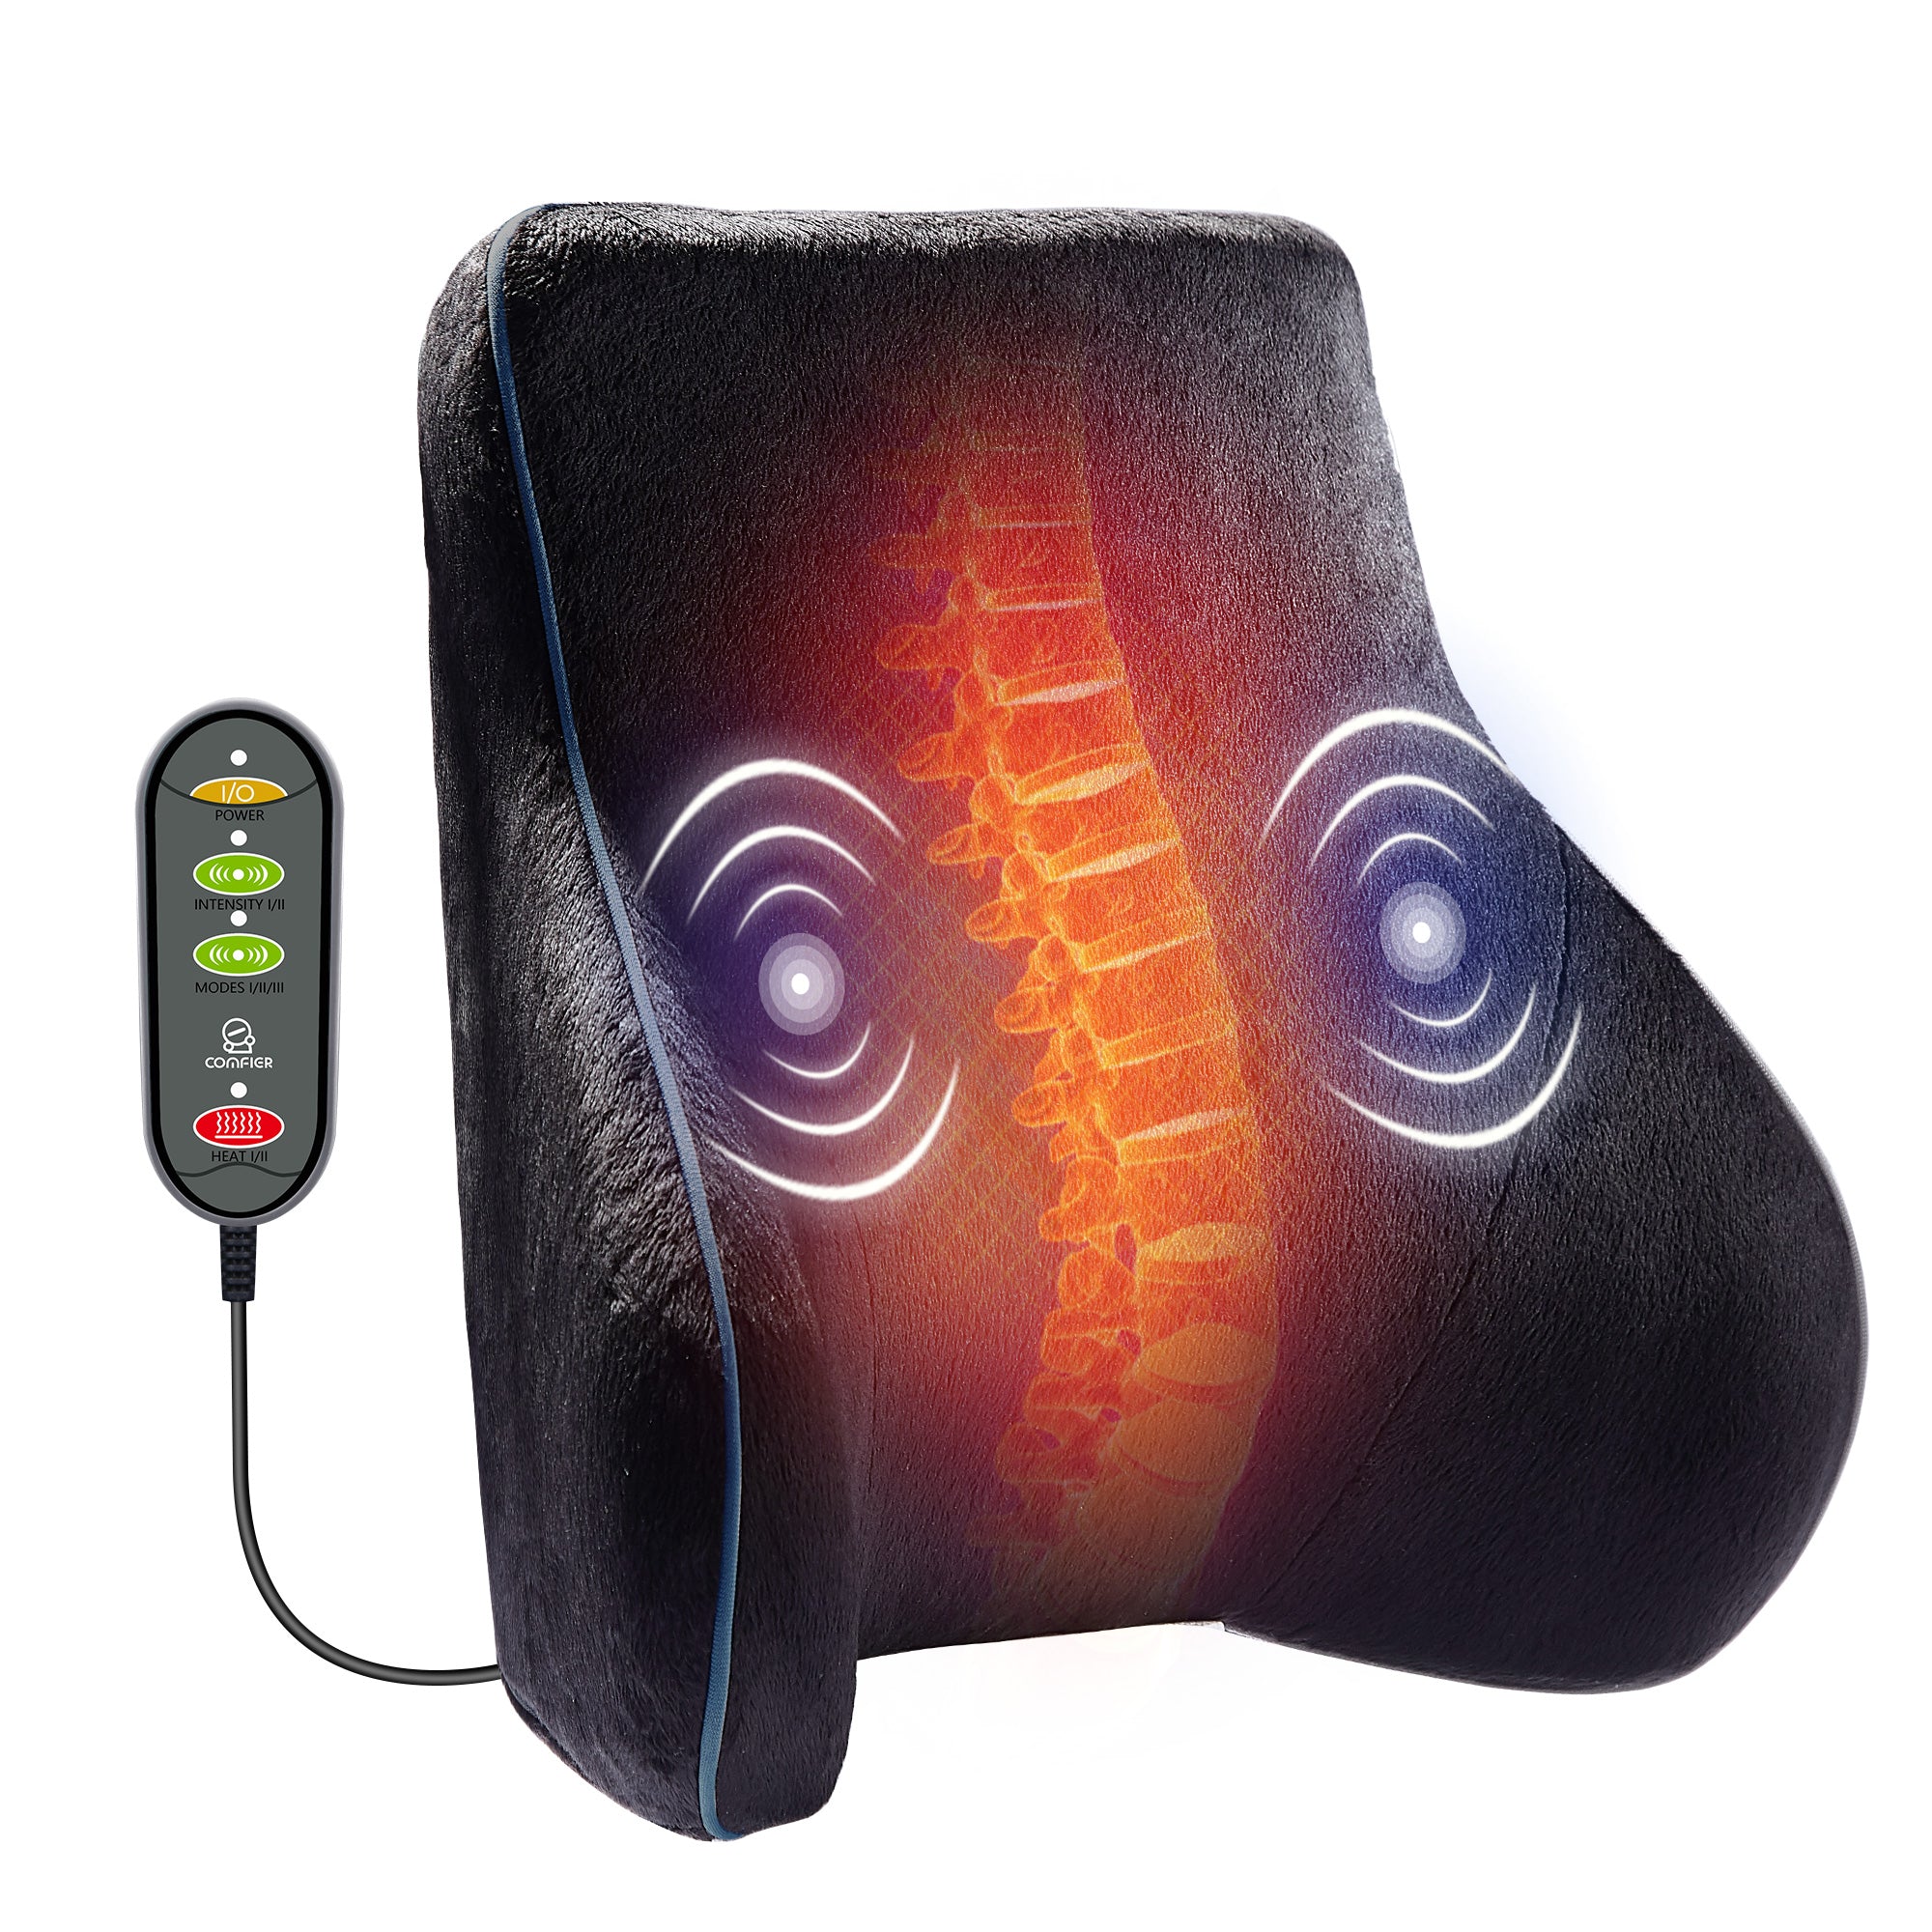 Comfort Touch Heated Lumbar Support Cushion